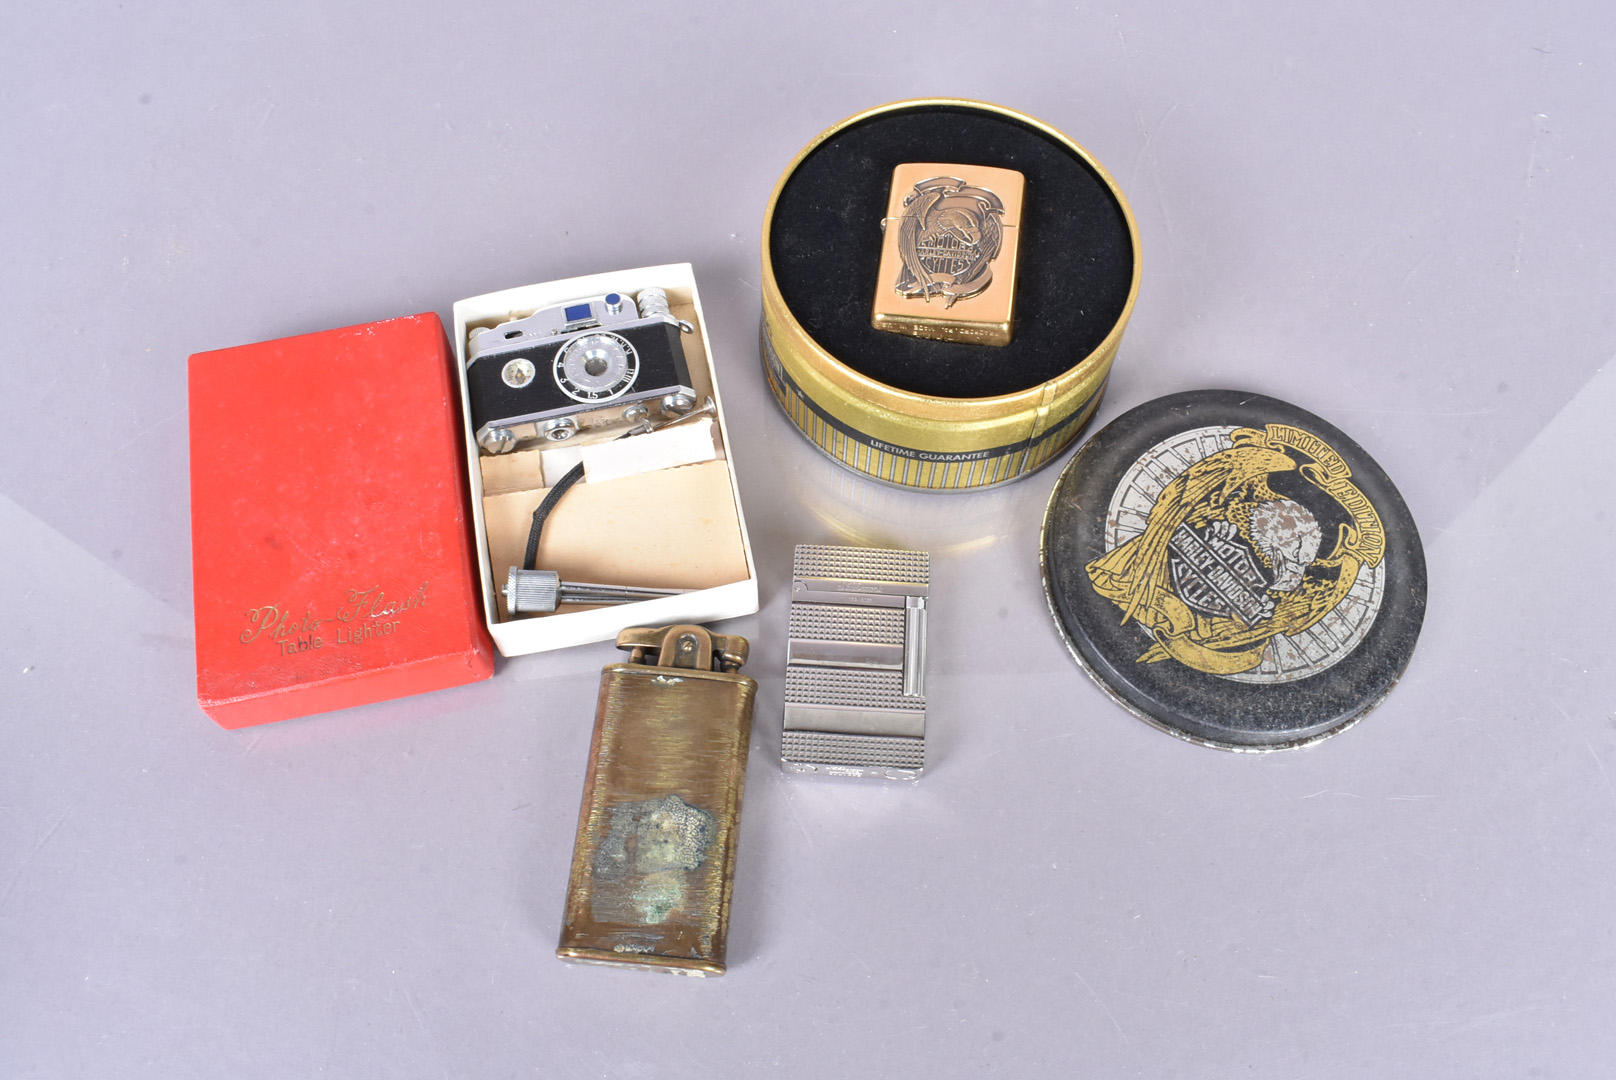 A 1995 brass Harley Davidson Zippo lighter, in retailer's case, together with an S.T Dupont, an